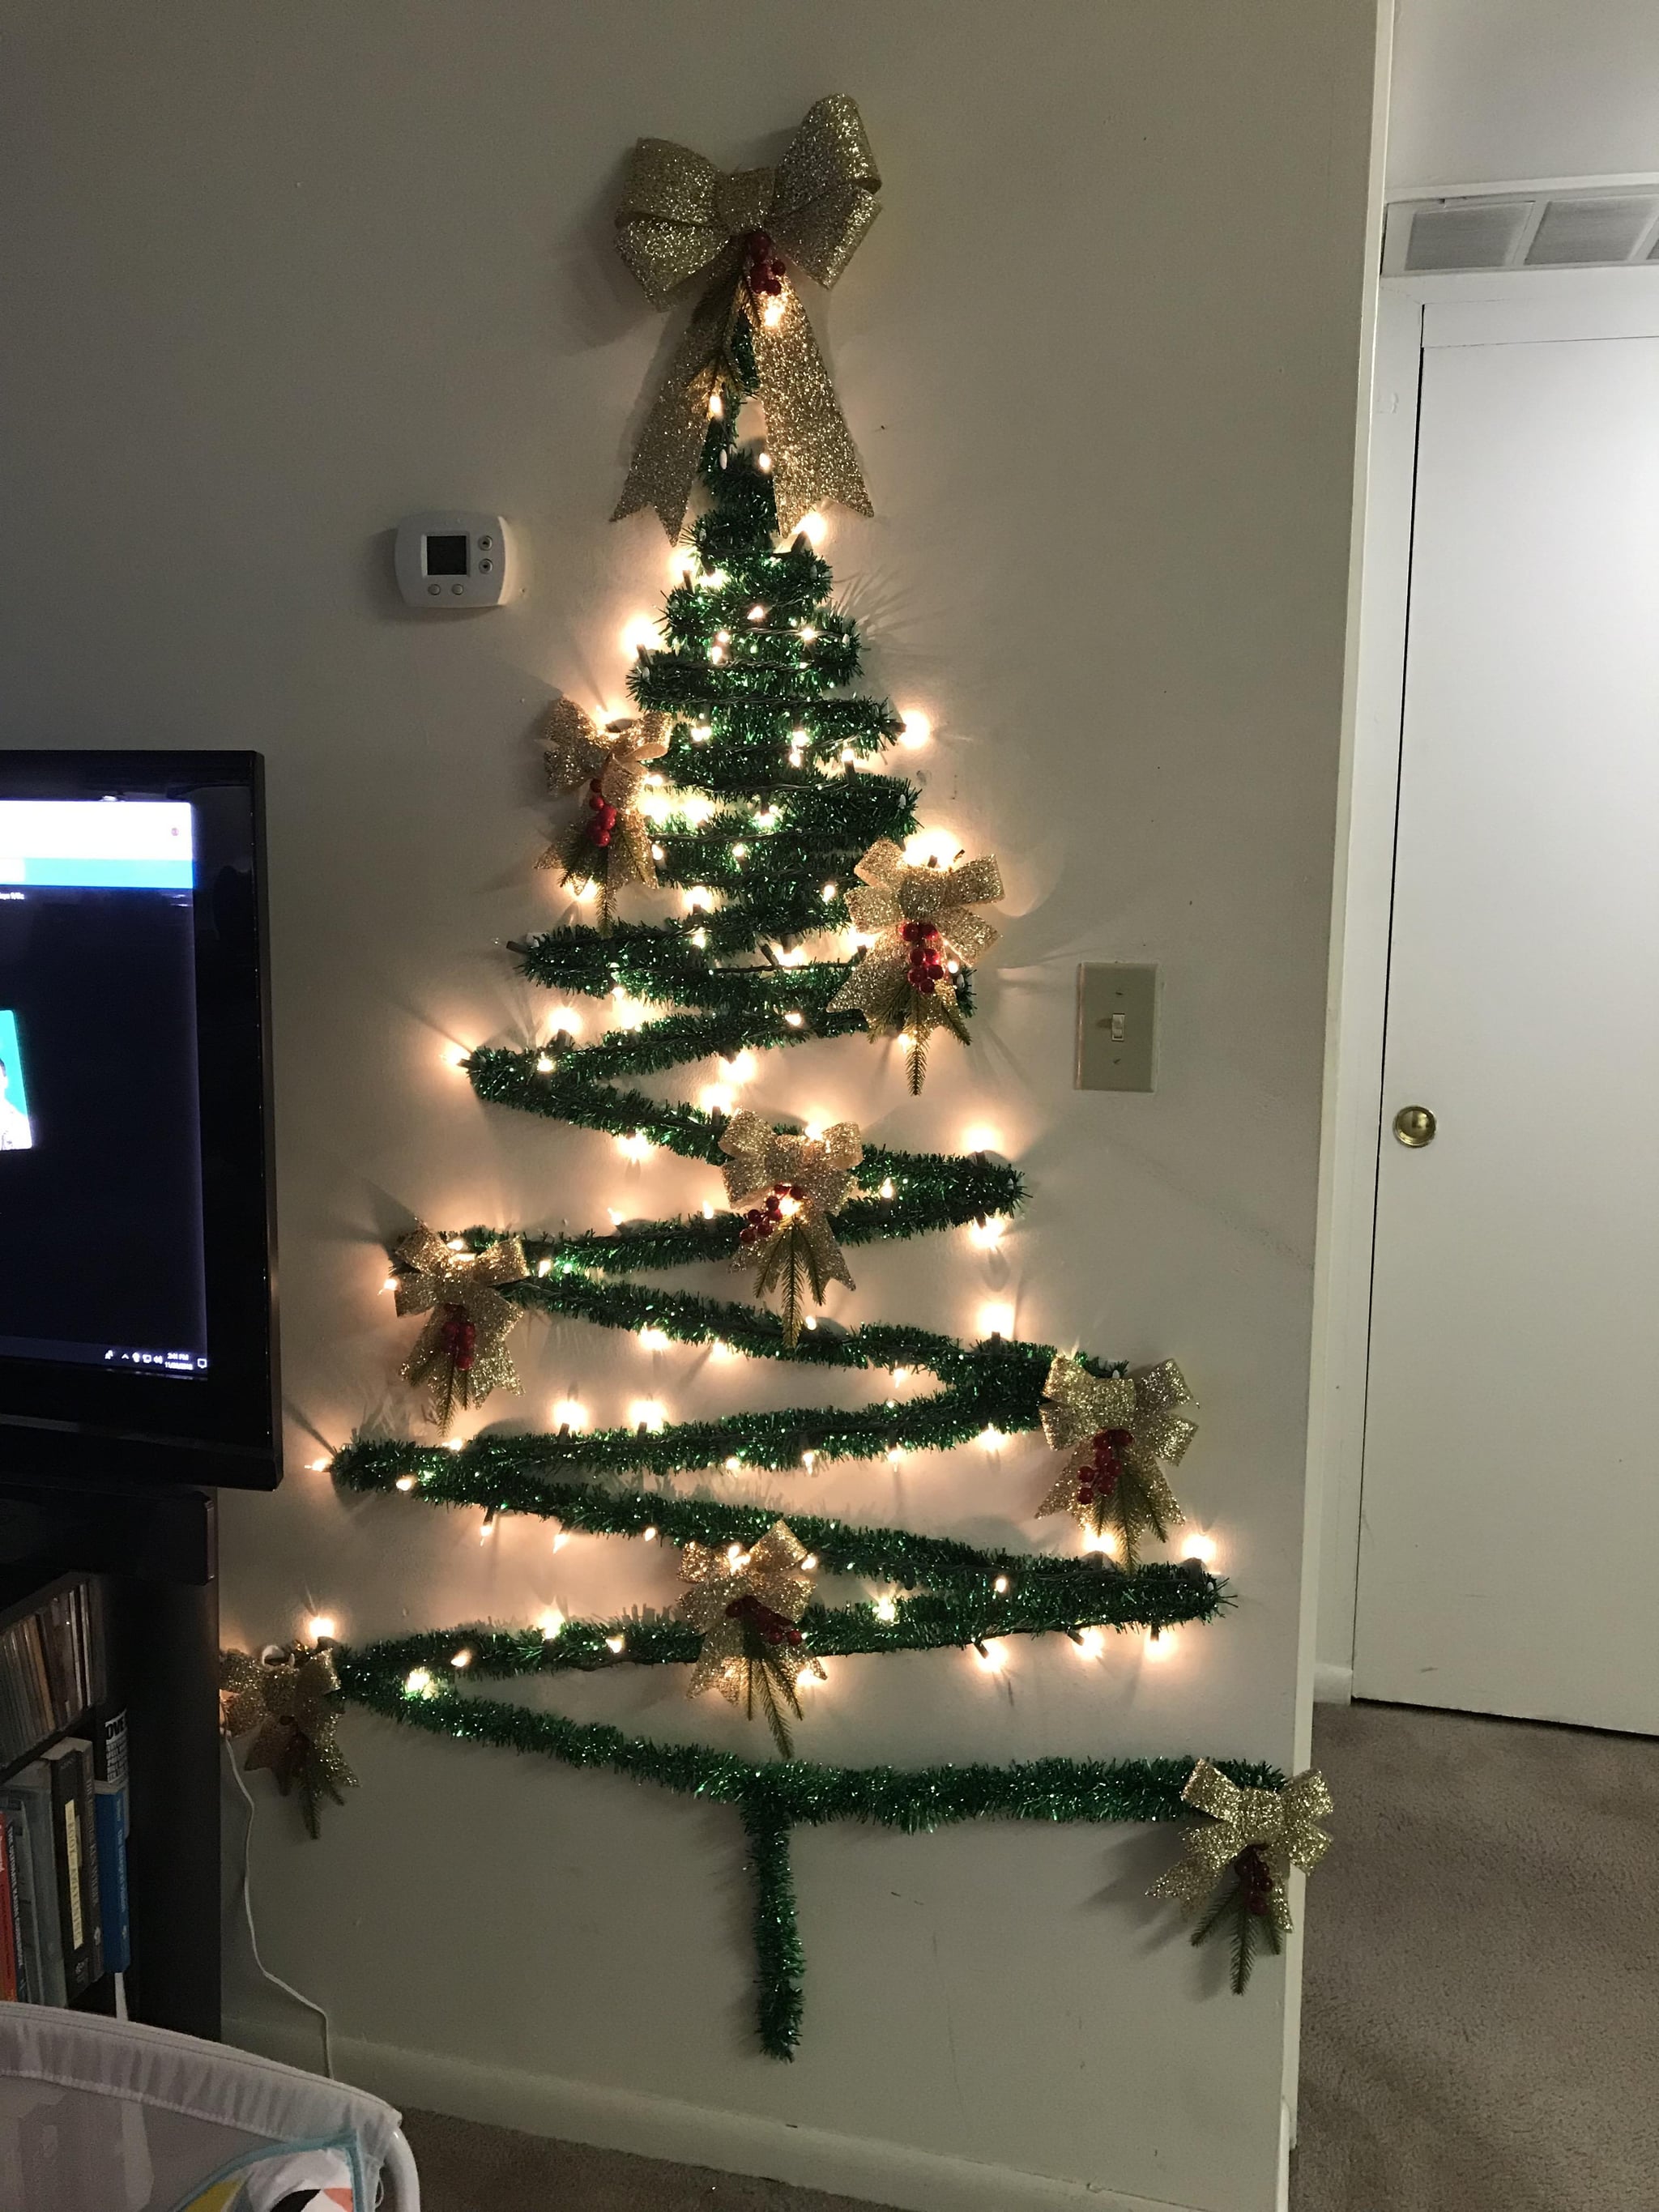 revolutie auteur dronken Mom's Wall Christmas Tree Hack For Small Spaces | POPSUGAR Family